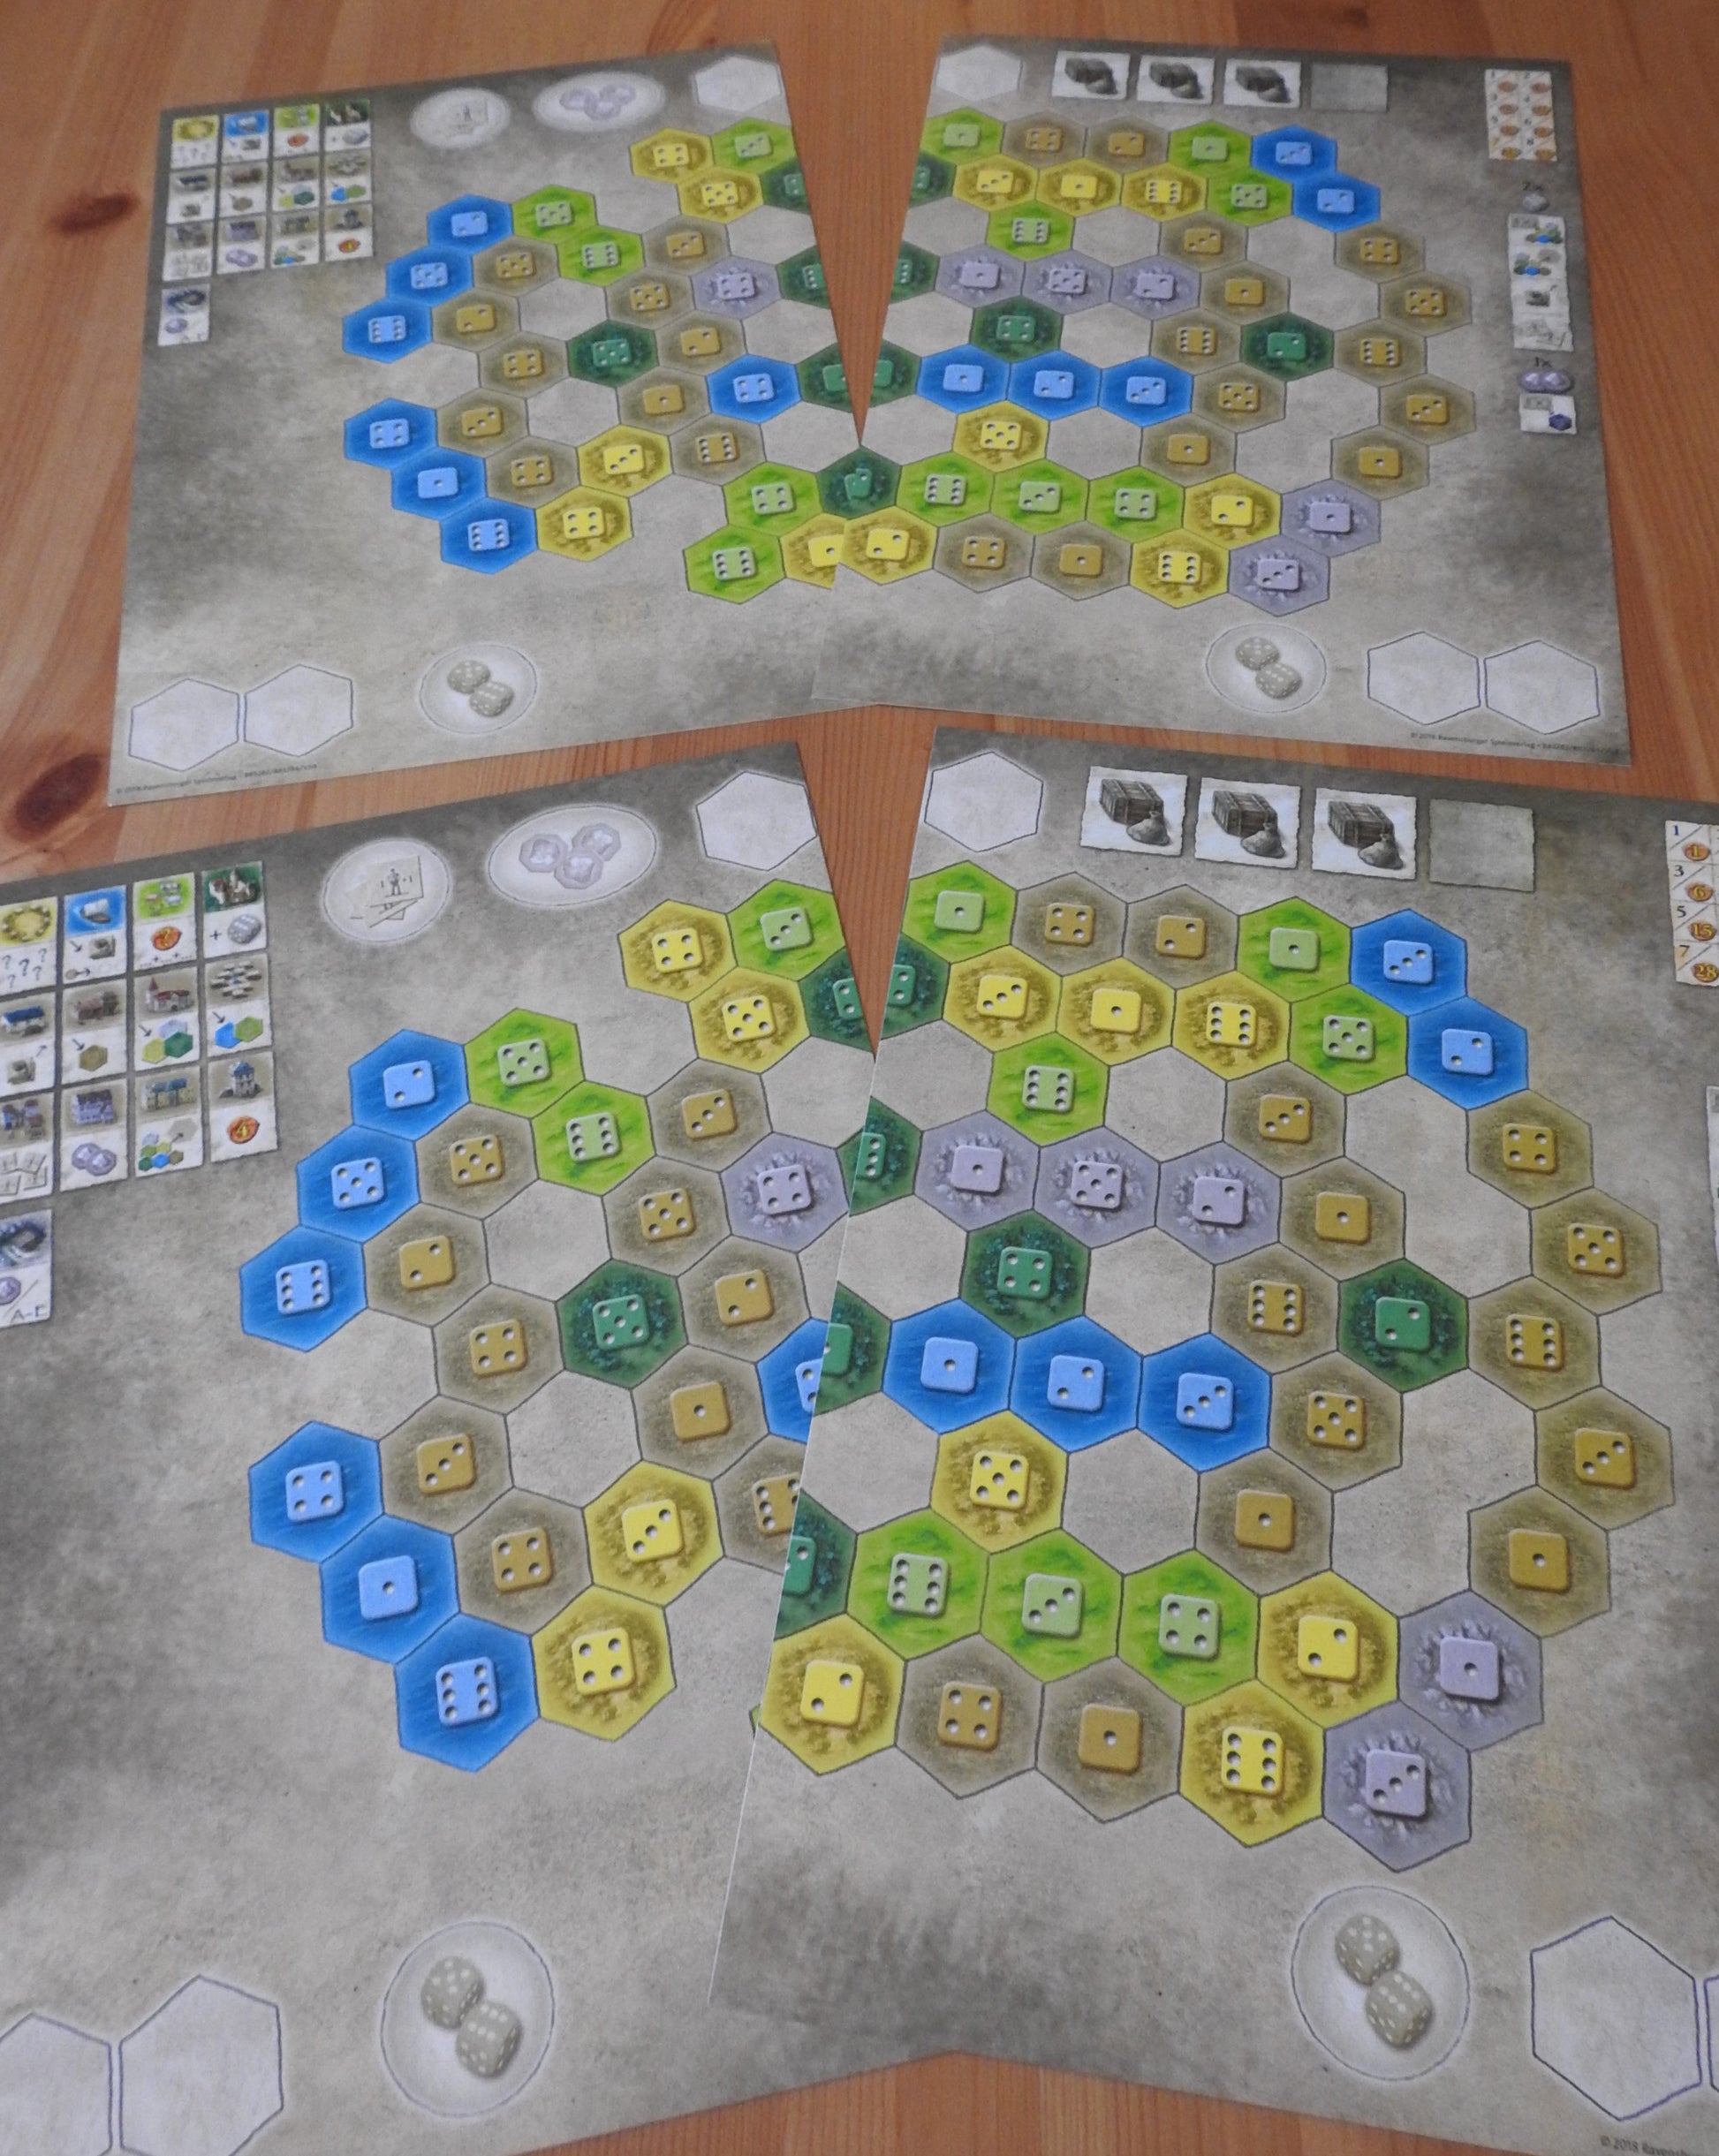 This is the more challenging side of the game boards, with multiple connections between either side!